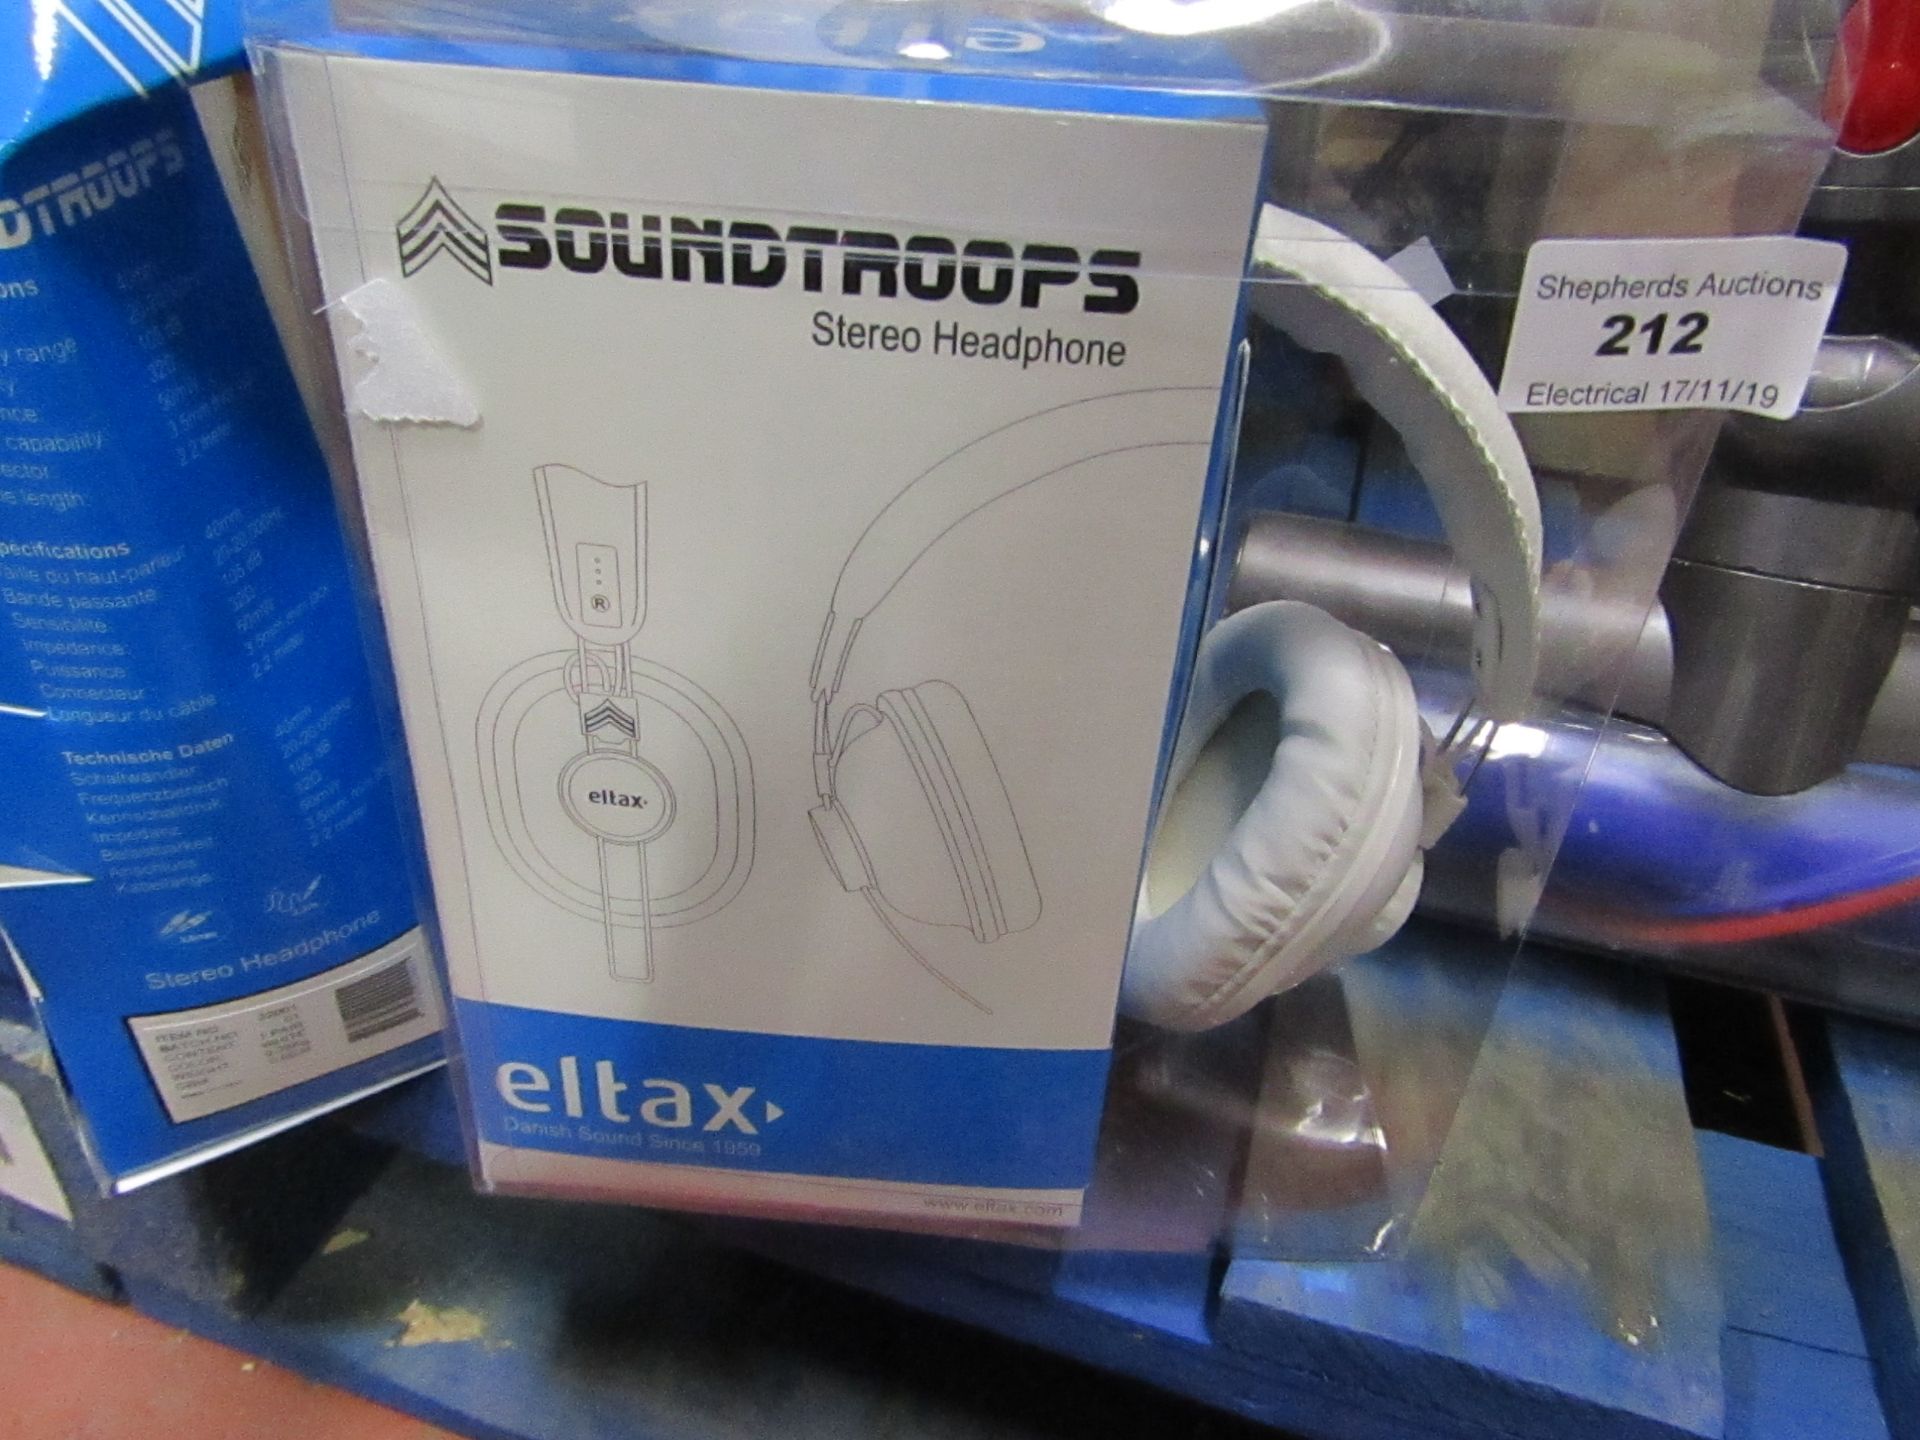 ELTAX - Soundtroops, stereo headphones, untested and packaging slightly damaged.